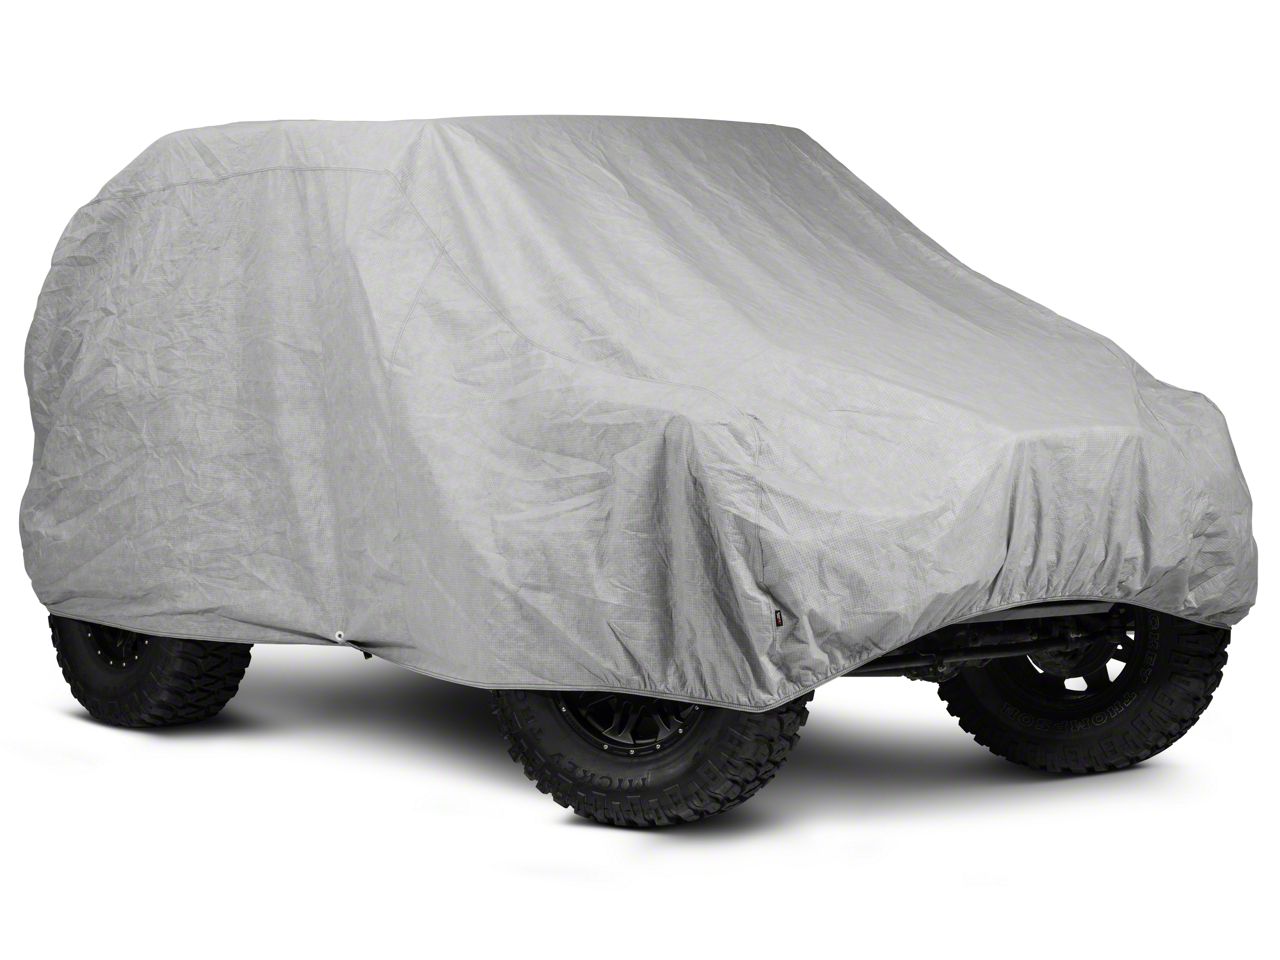 AL4X4 Outdoor Car Cover Custom All Weather Prevention Car Cover Compatible with Jeep Wrangler CJ,YJ TJ,JL & JK 1996-2020 